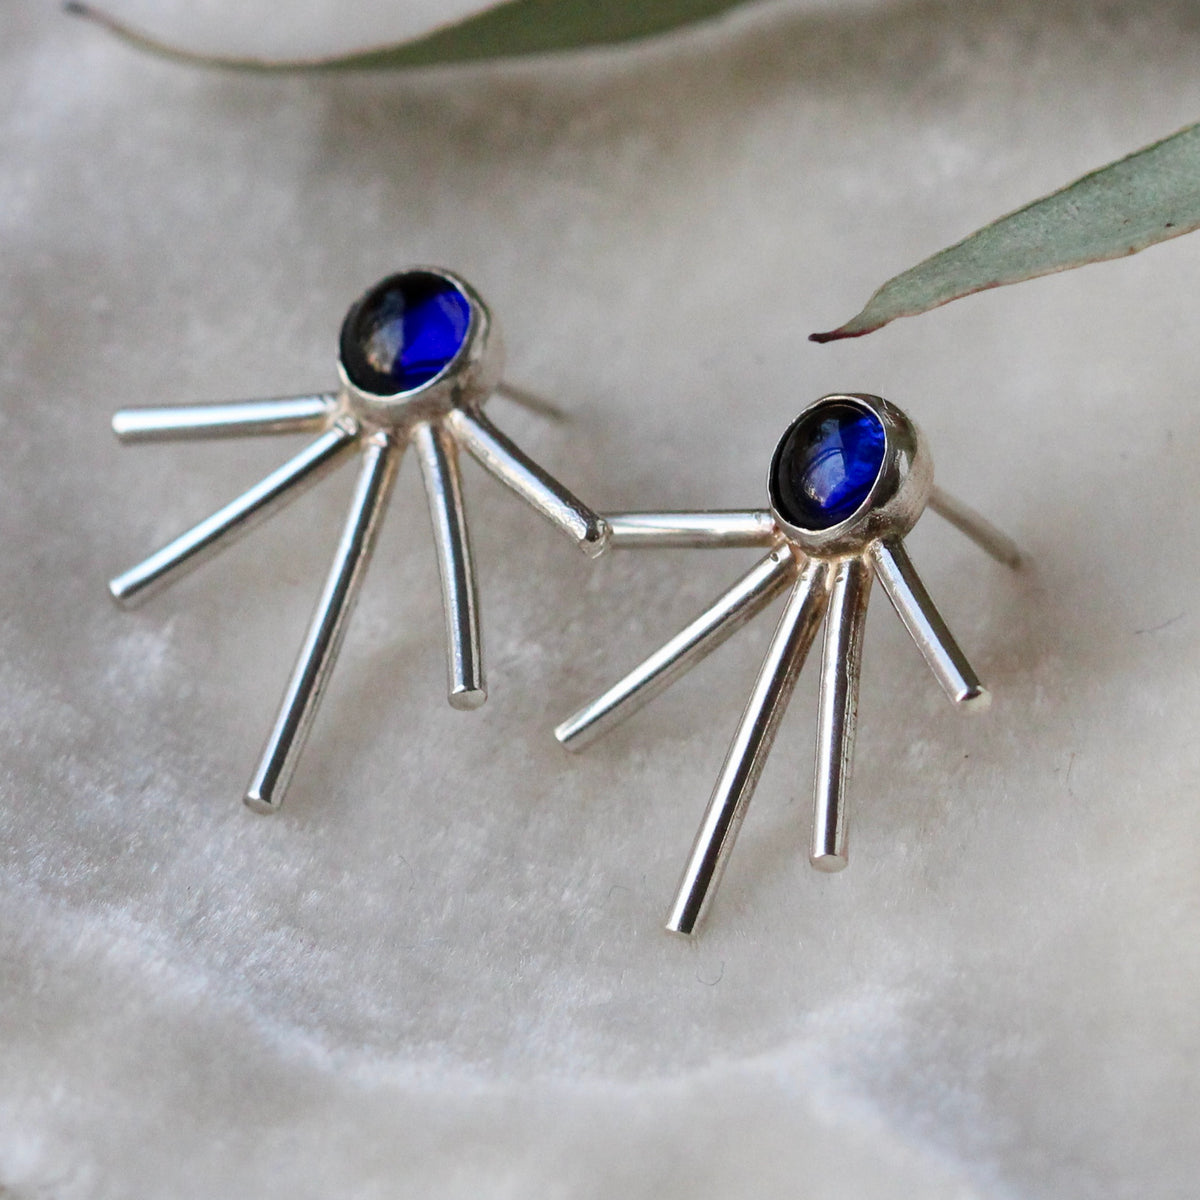 Starburst earrings Sapphire and sterling silver